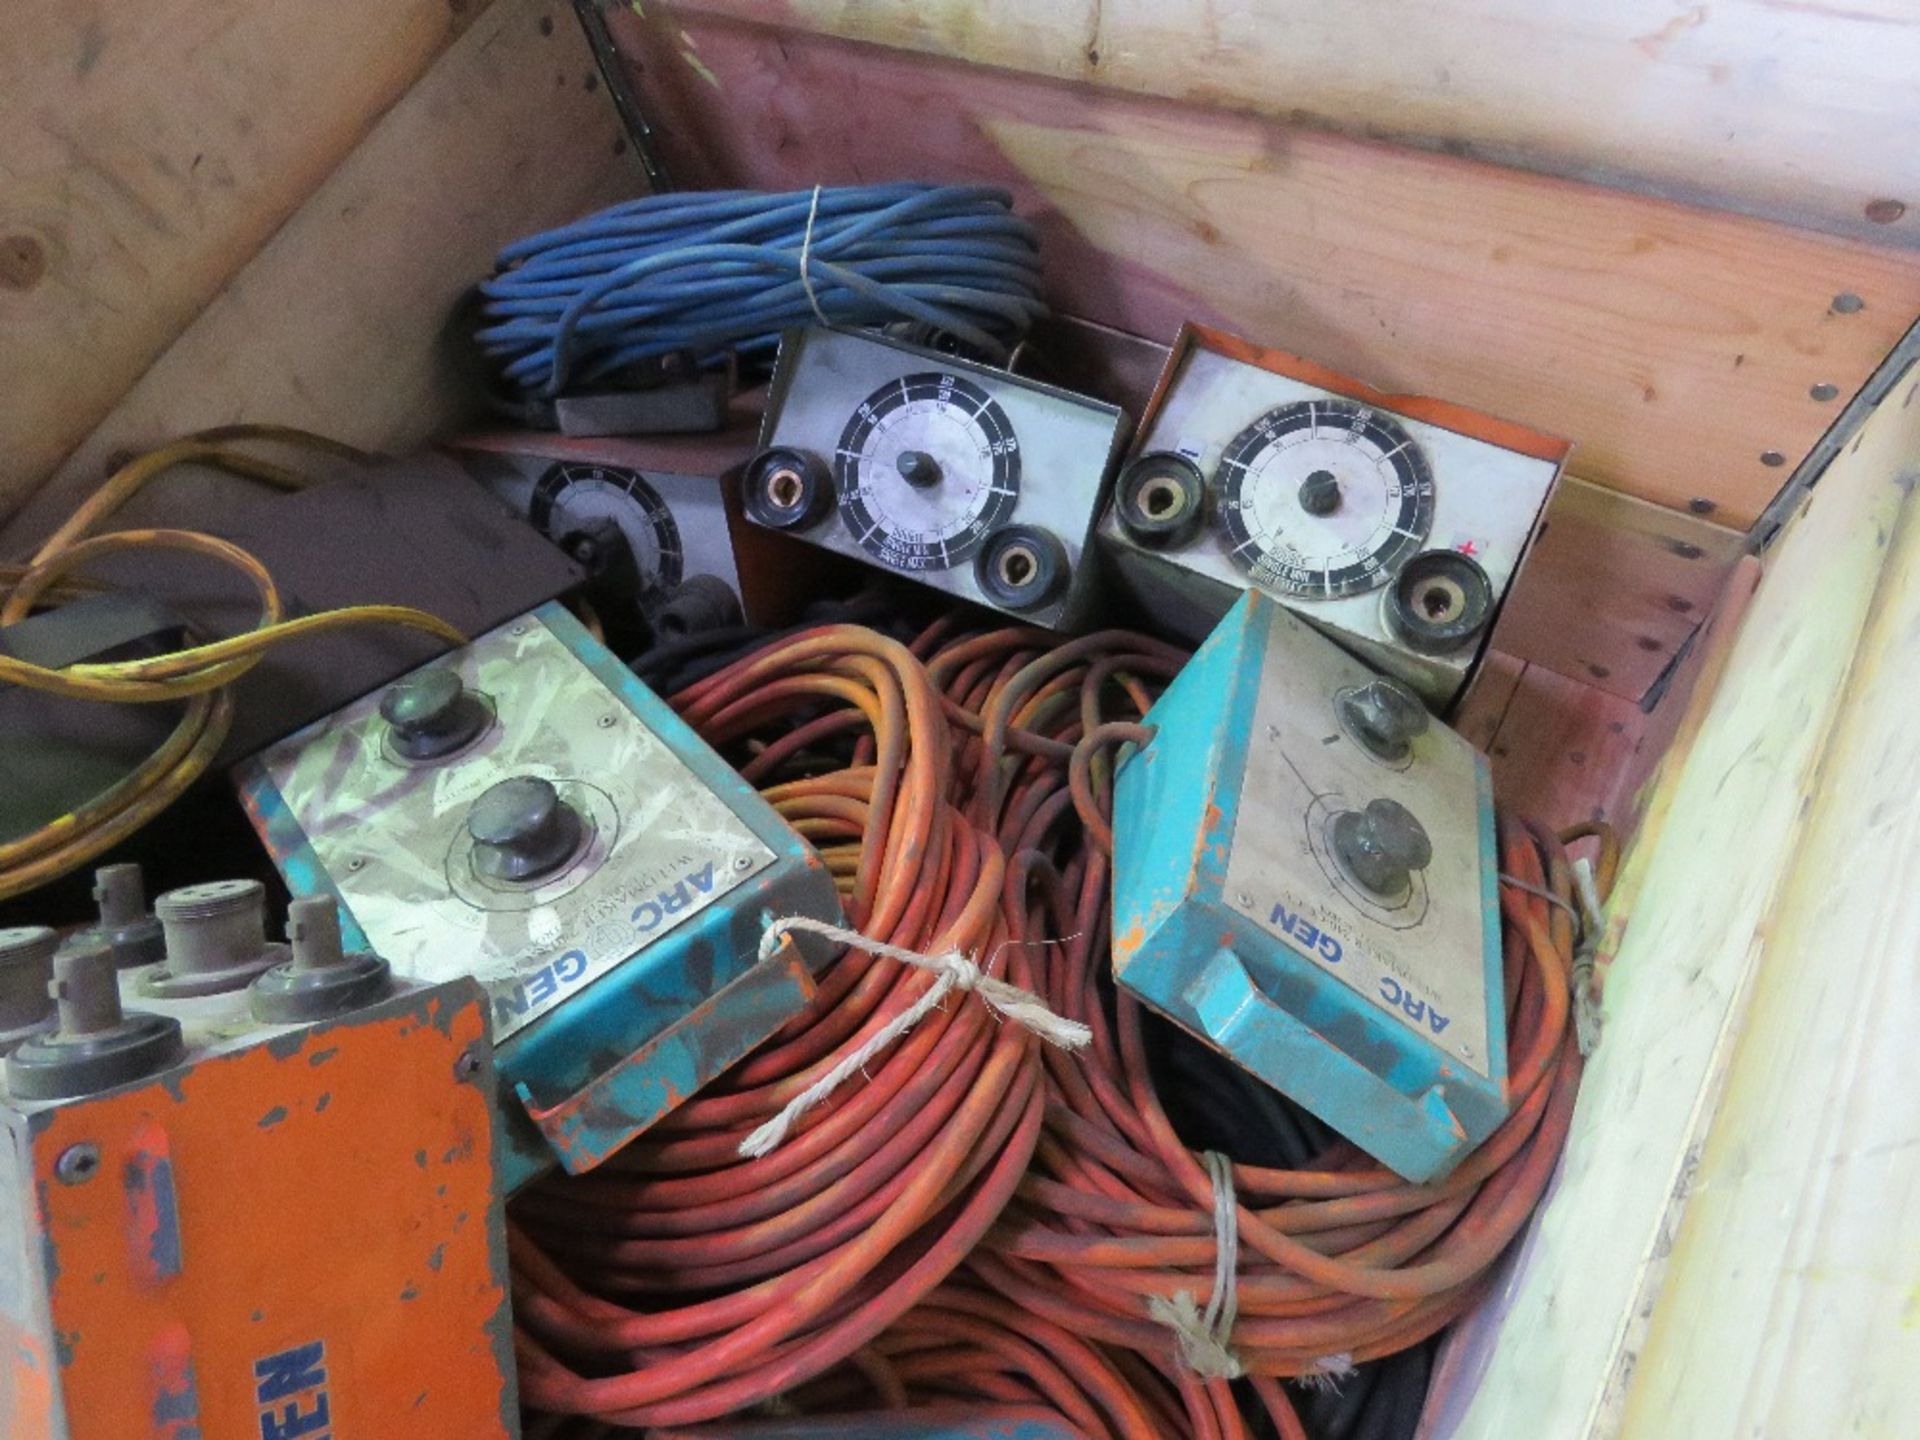 STILLAGE OF WELDING LEADS AND CONTROLLERS ETC. - Image 5 of 7